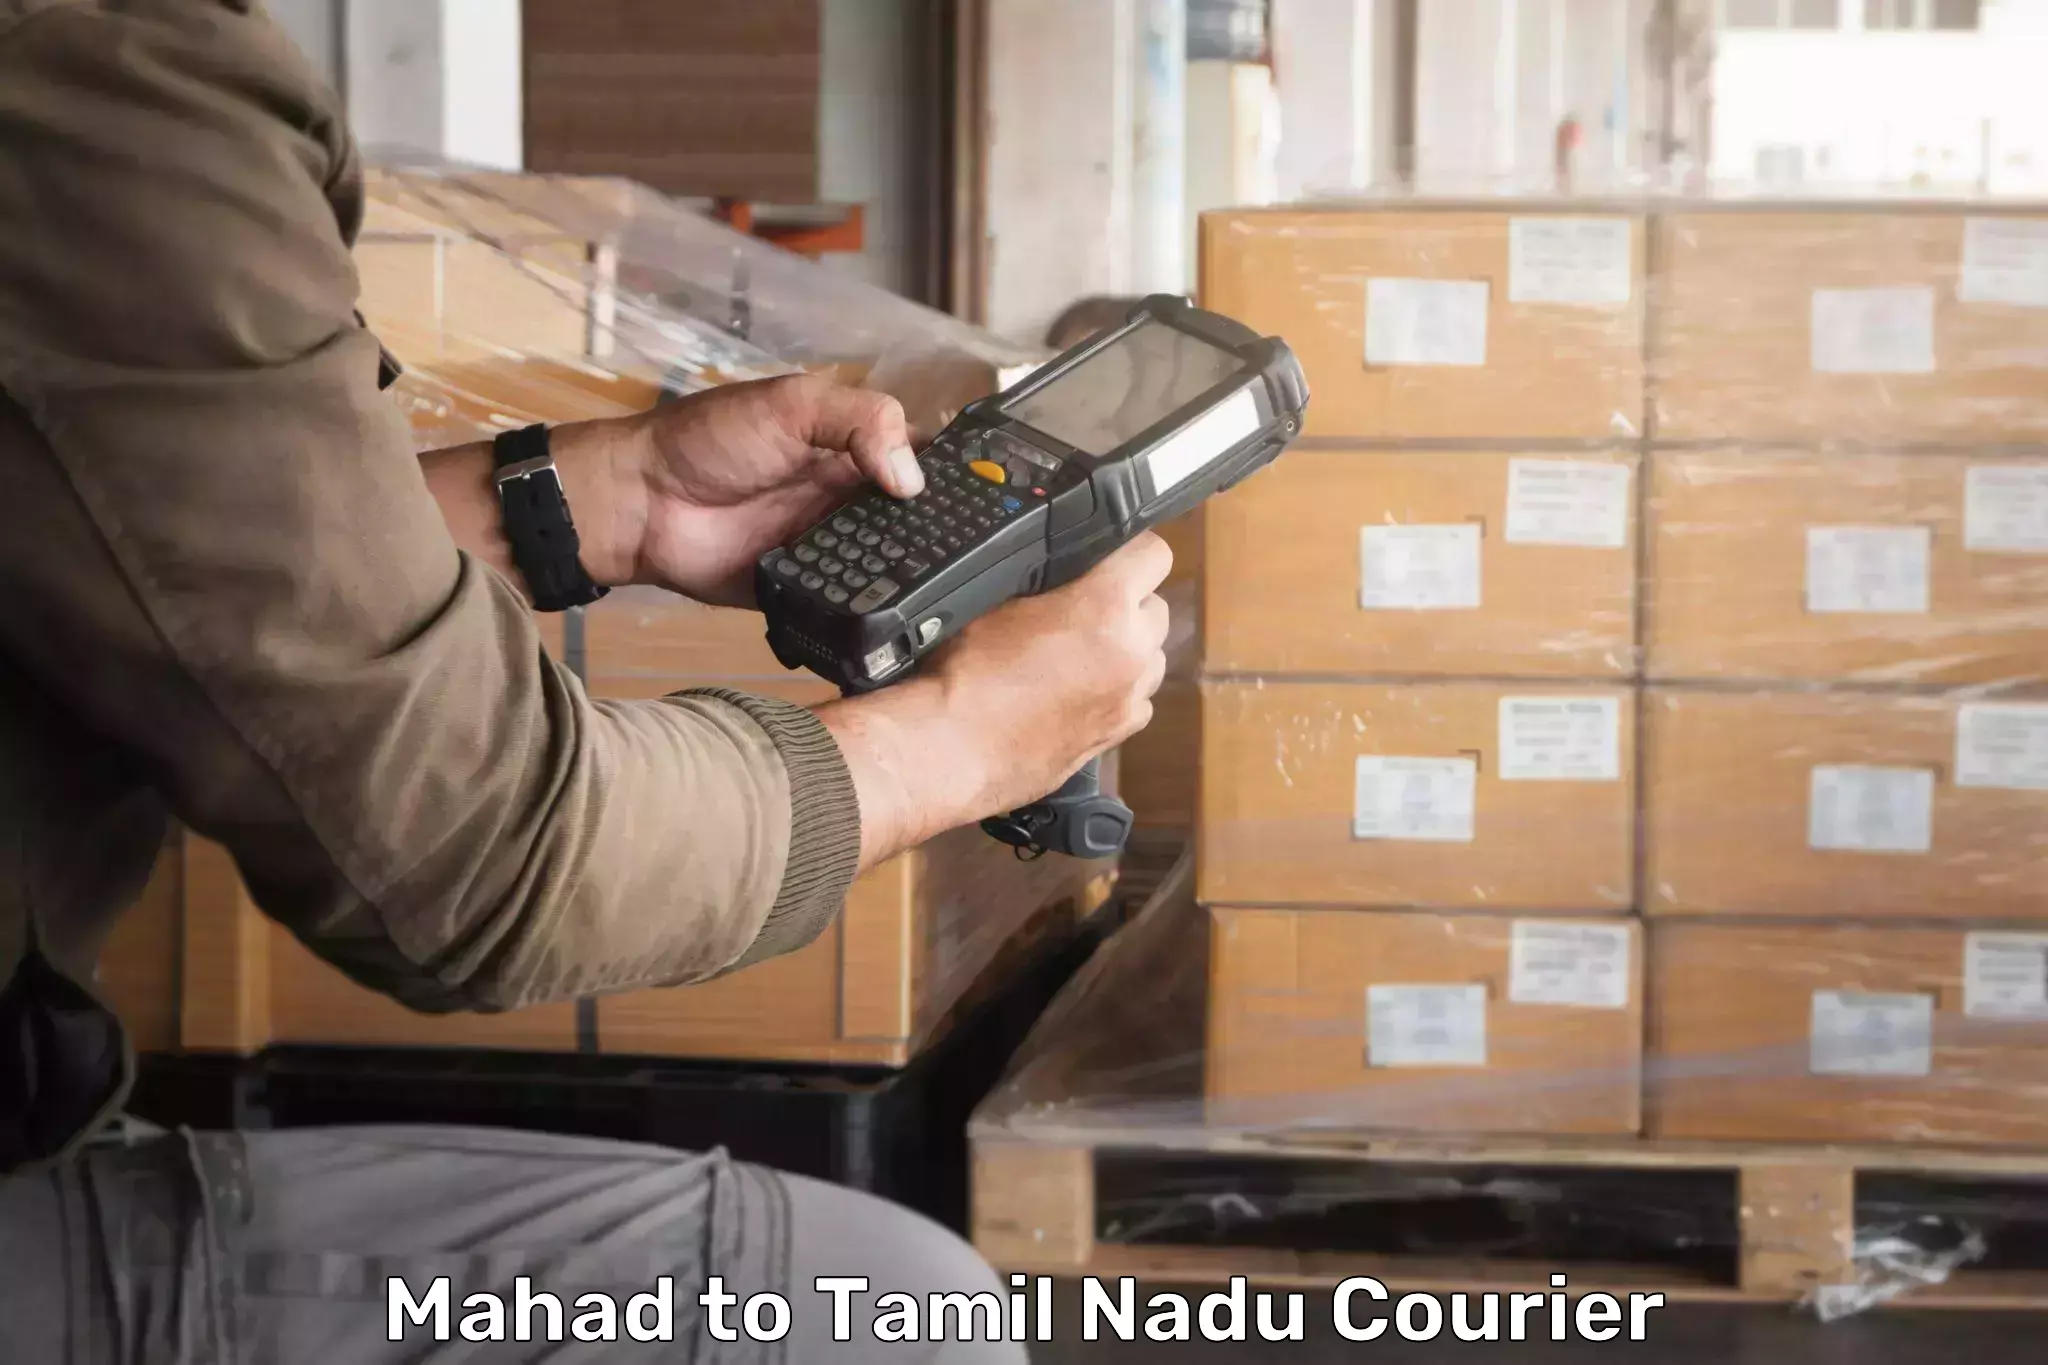 Dynamic courier operations Mahad to Tuticorin Port